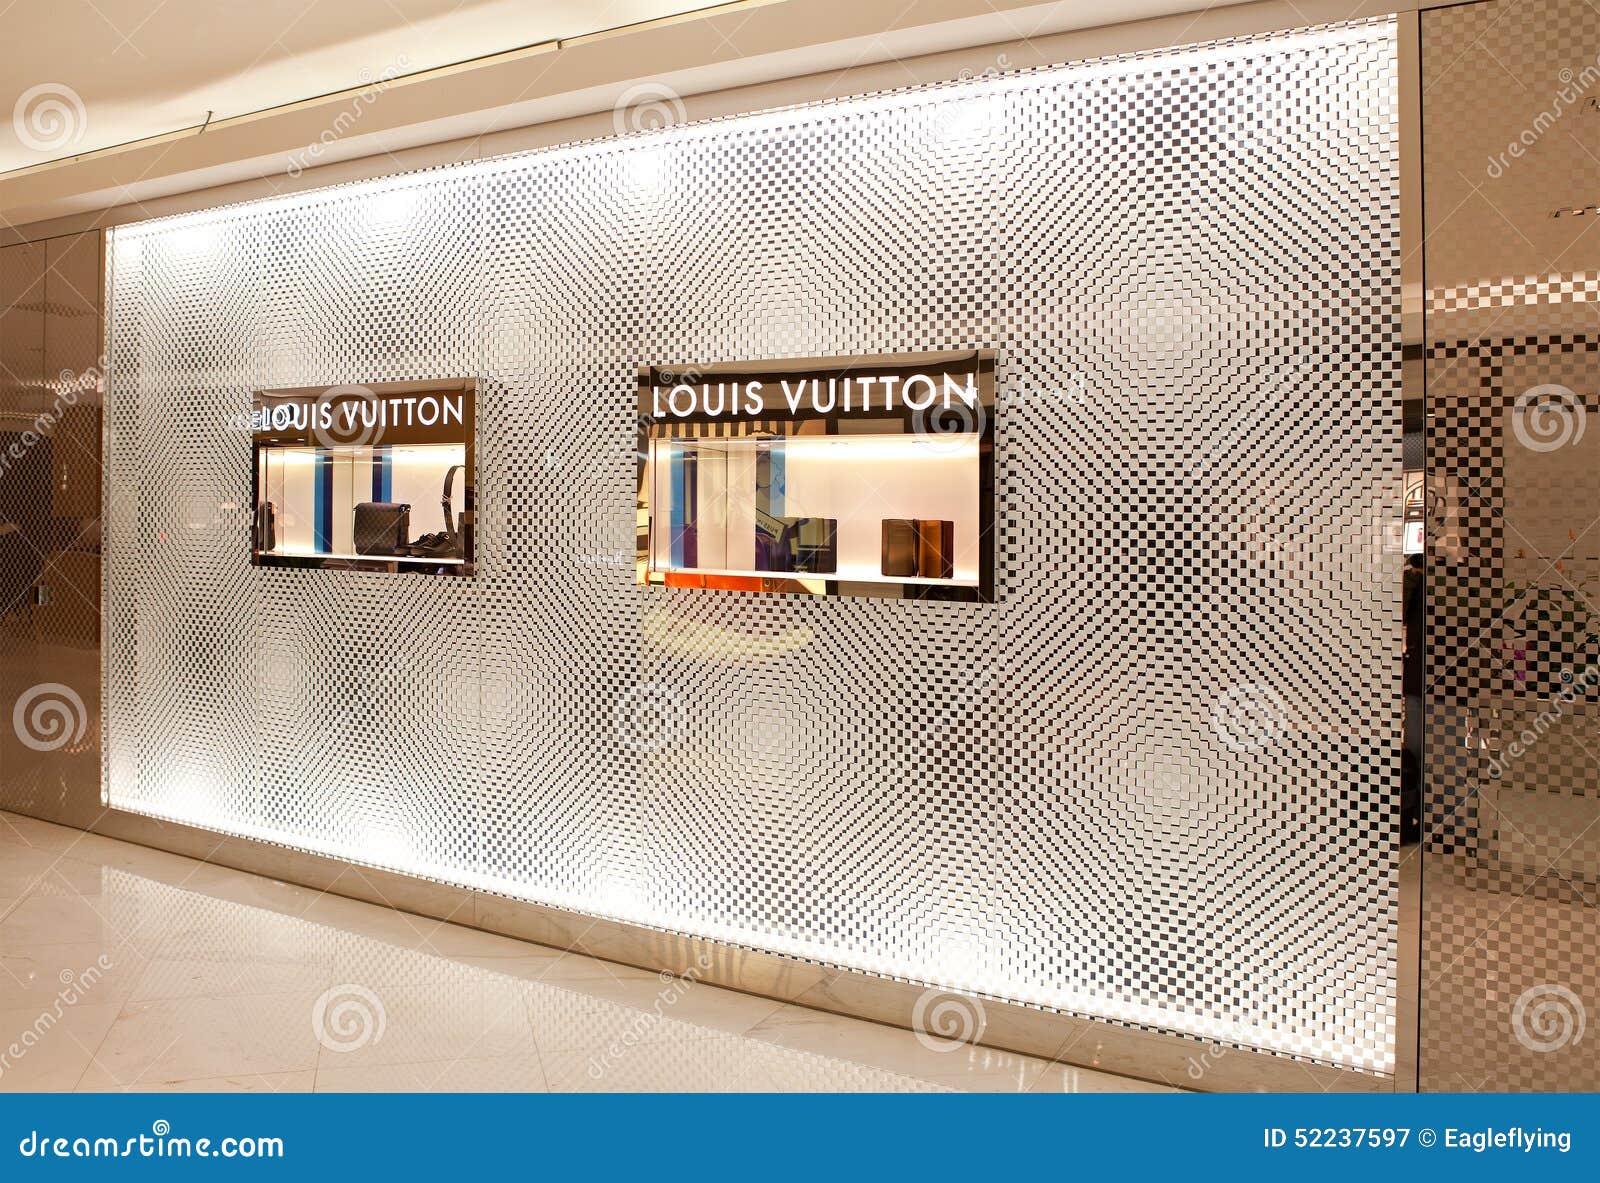 Vuitton store photography. Image of china - 52237597